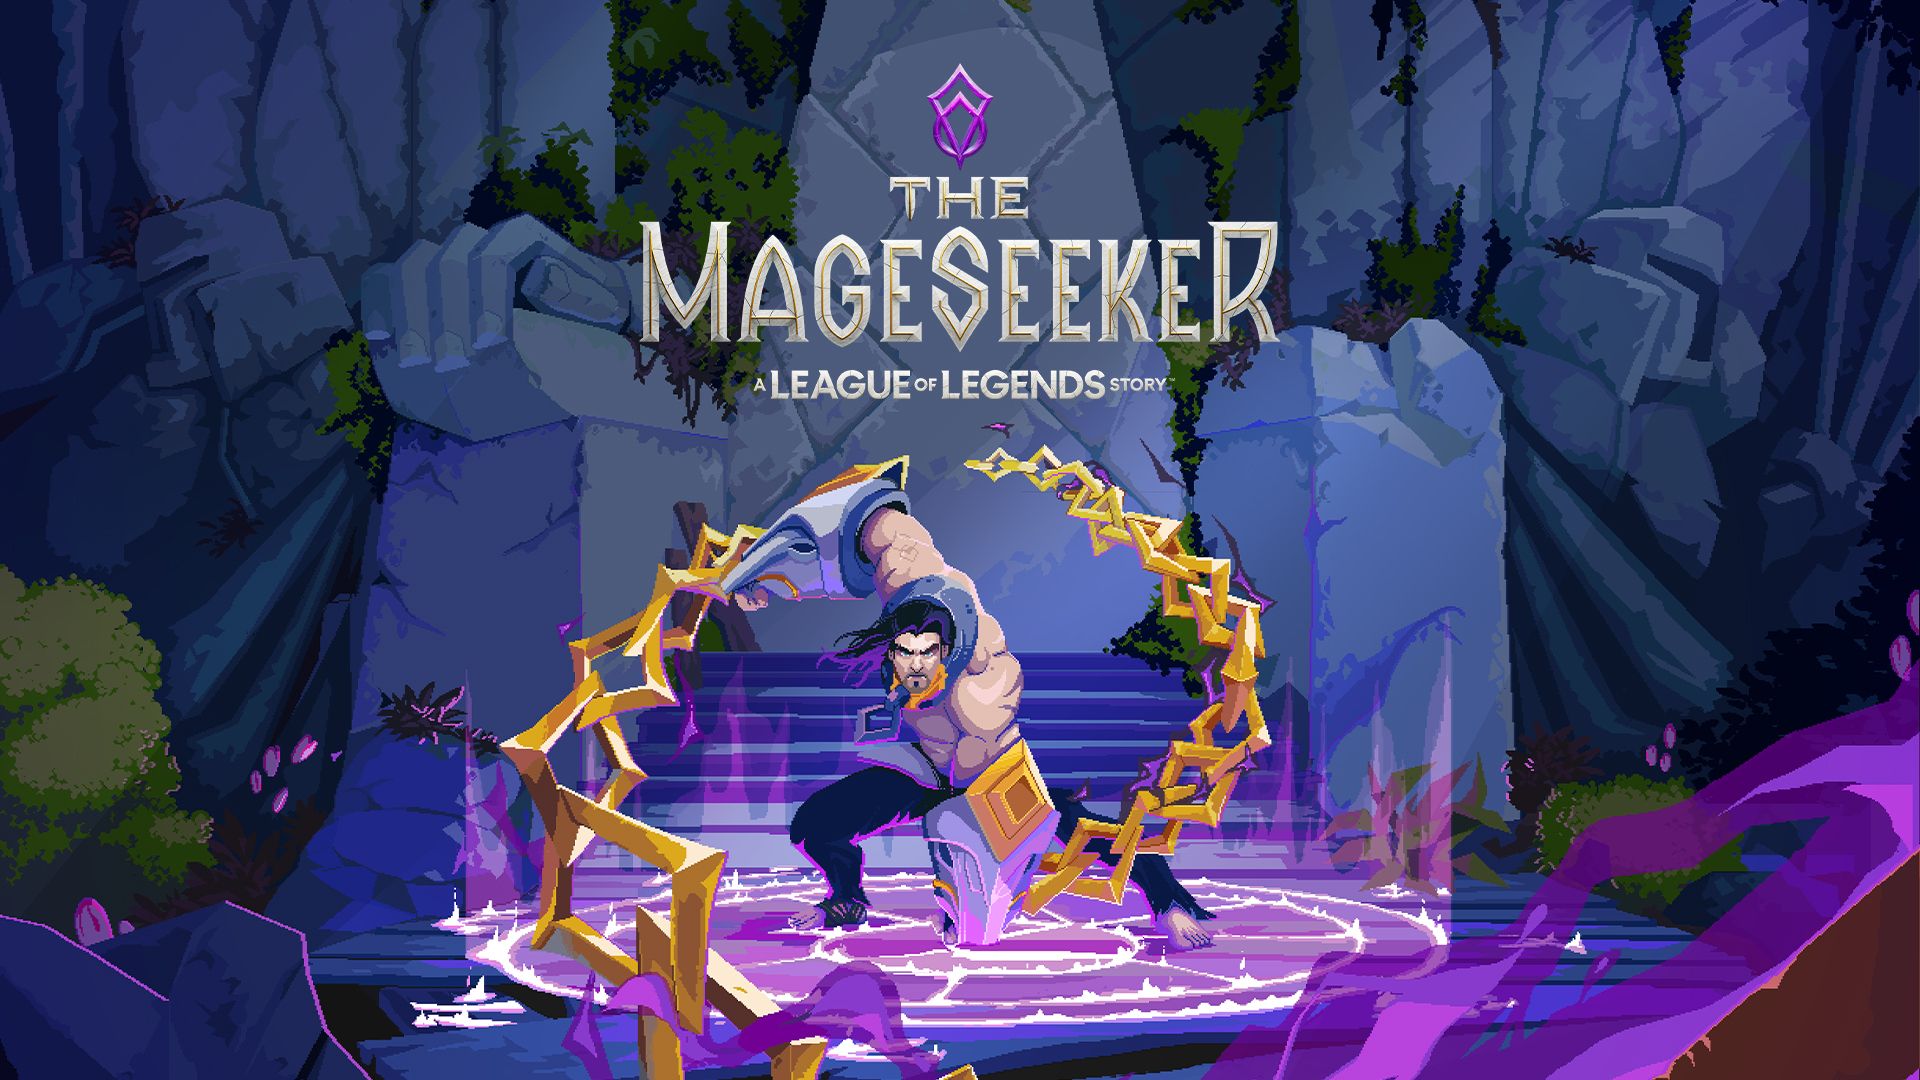 Riot Forge announces 2D action RPG “The Mageseeker: A League of Legends Story”